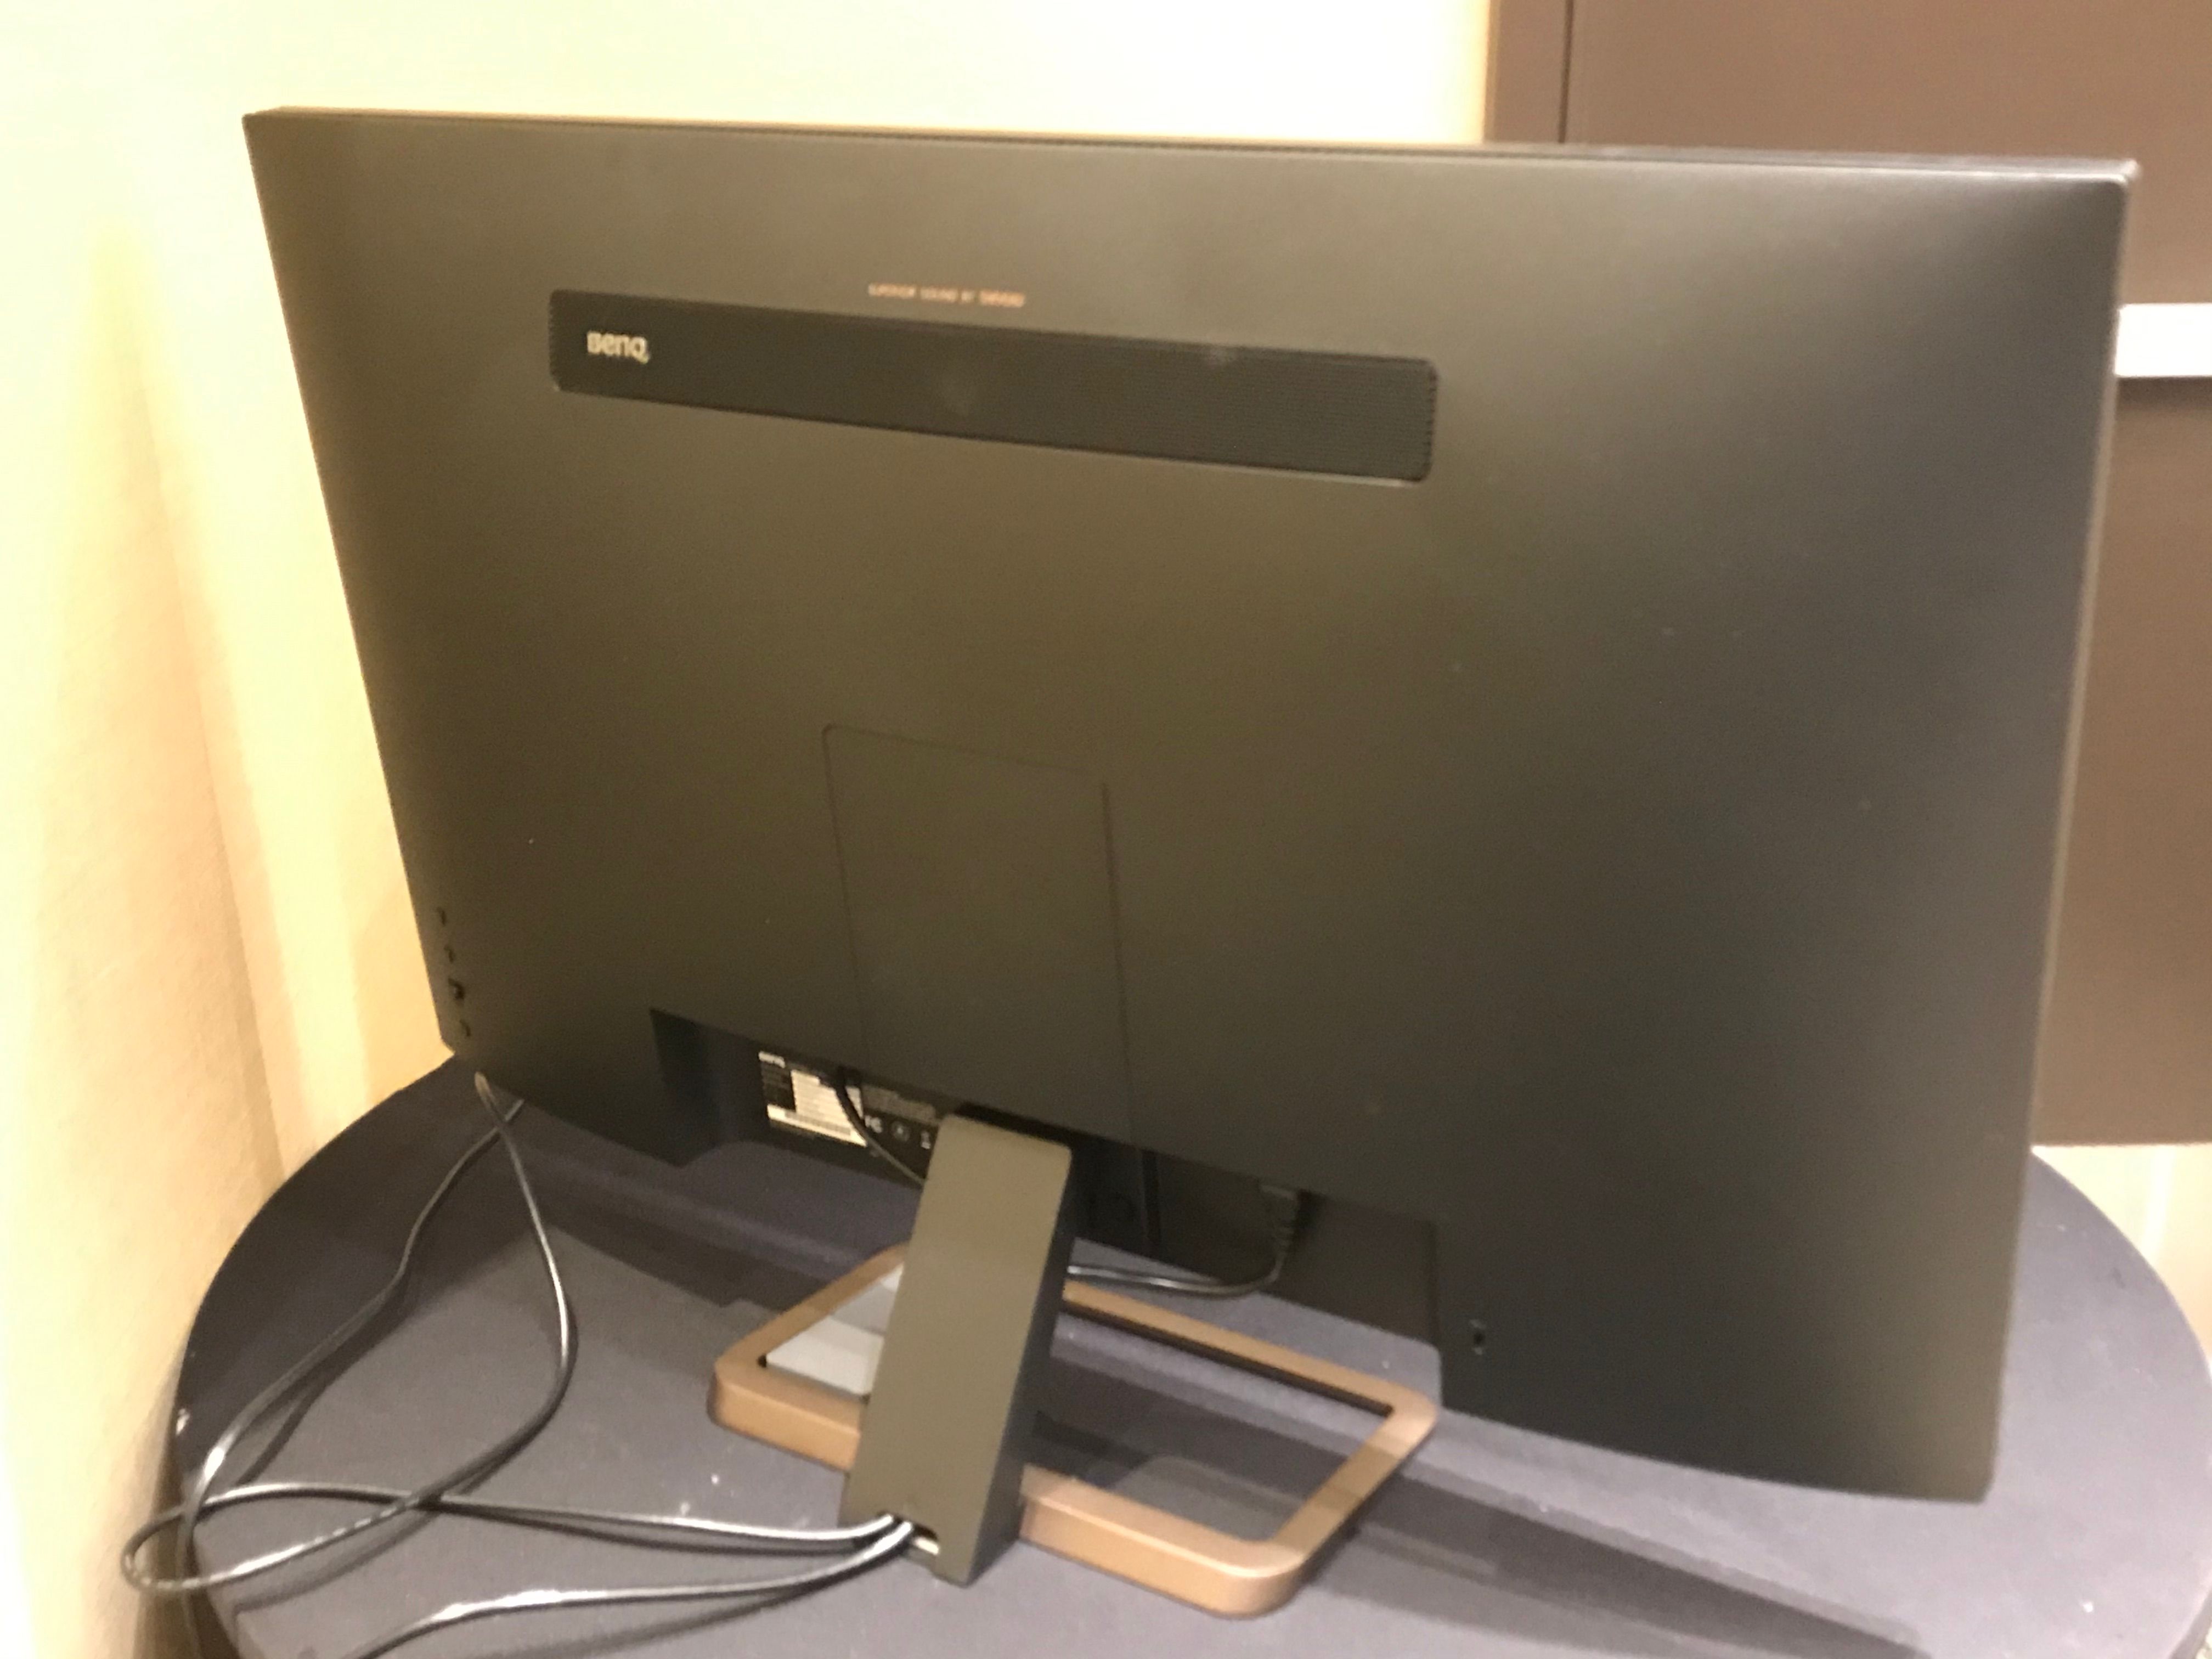 Back of the BenQ 32-inch Entertainment Monitor